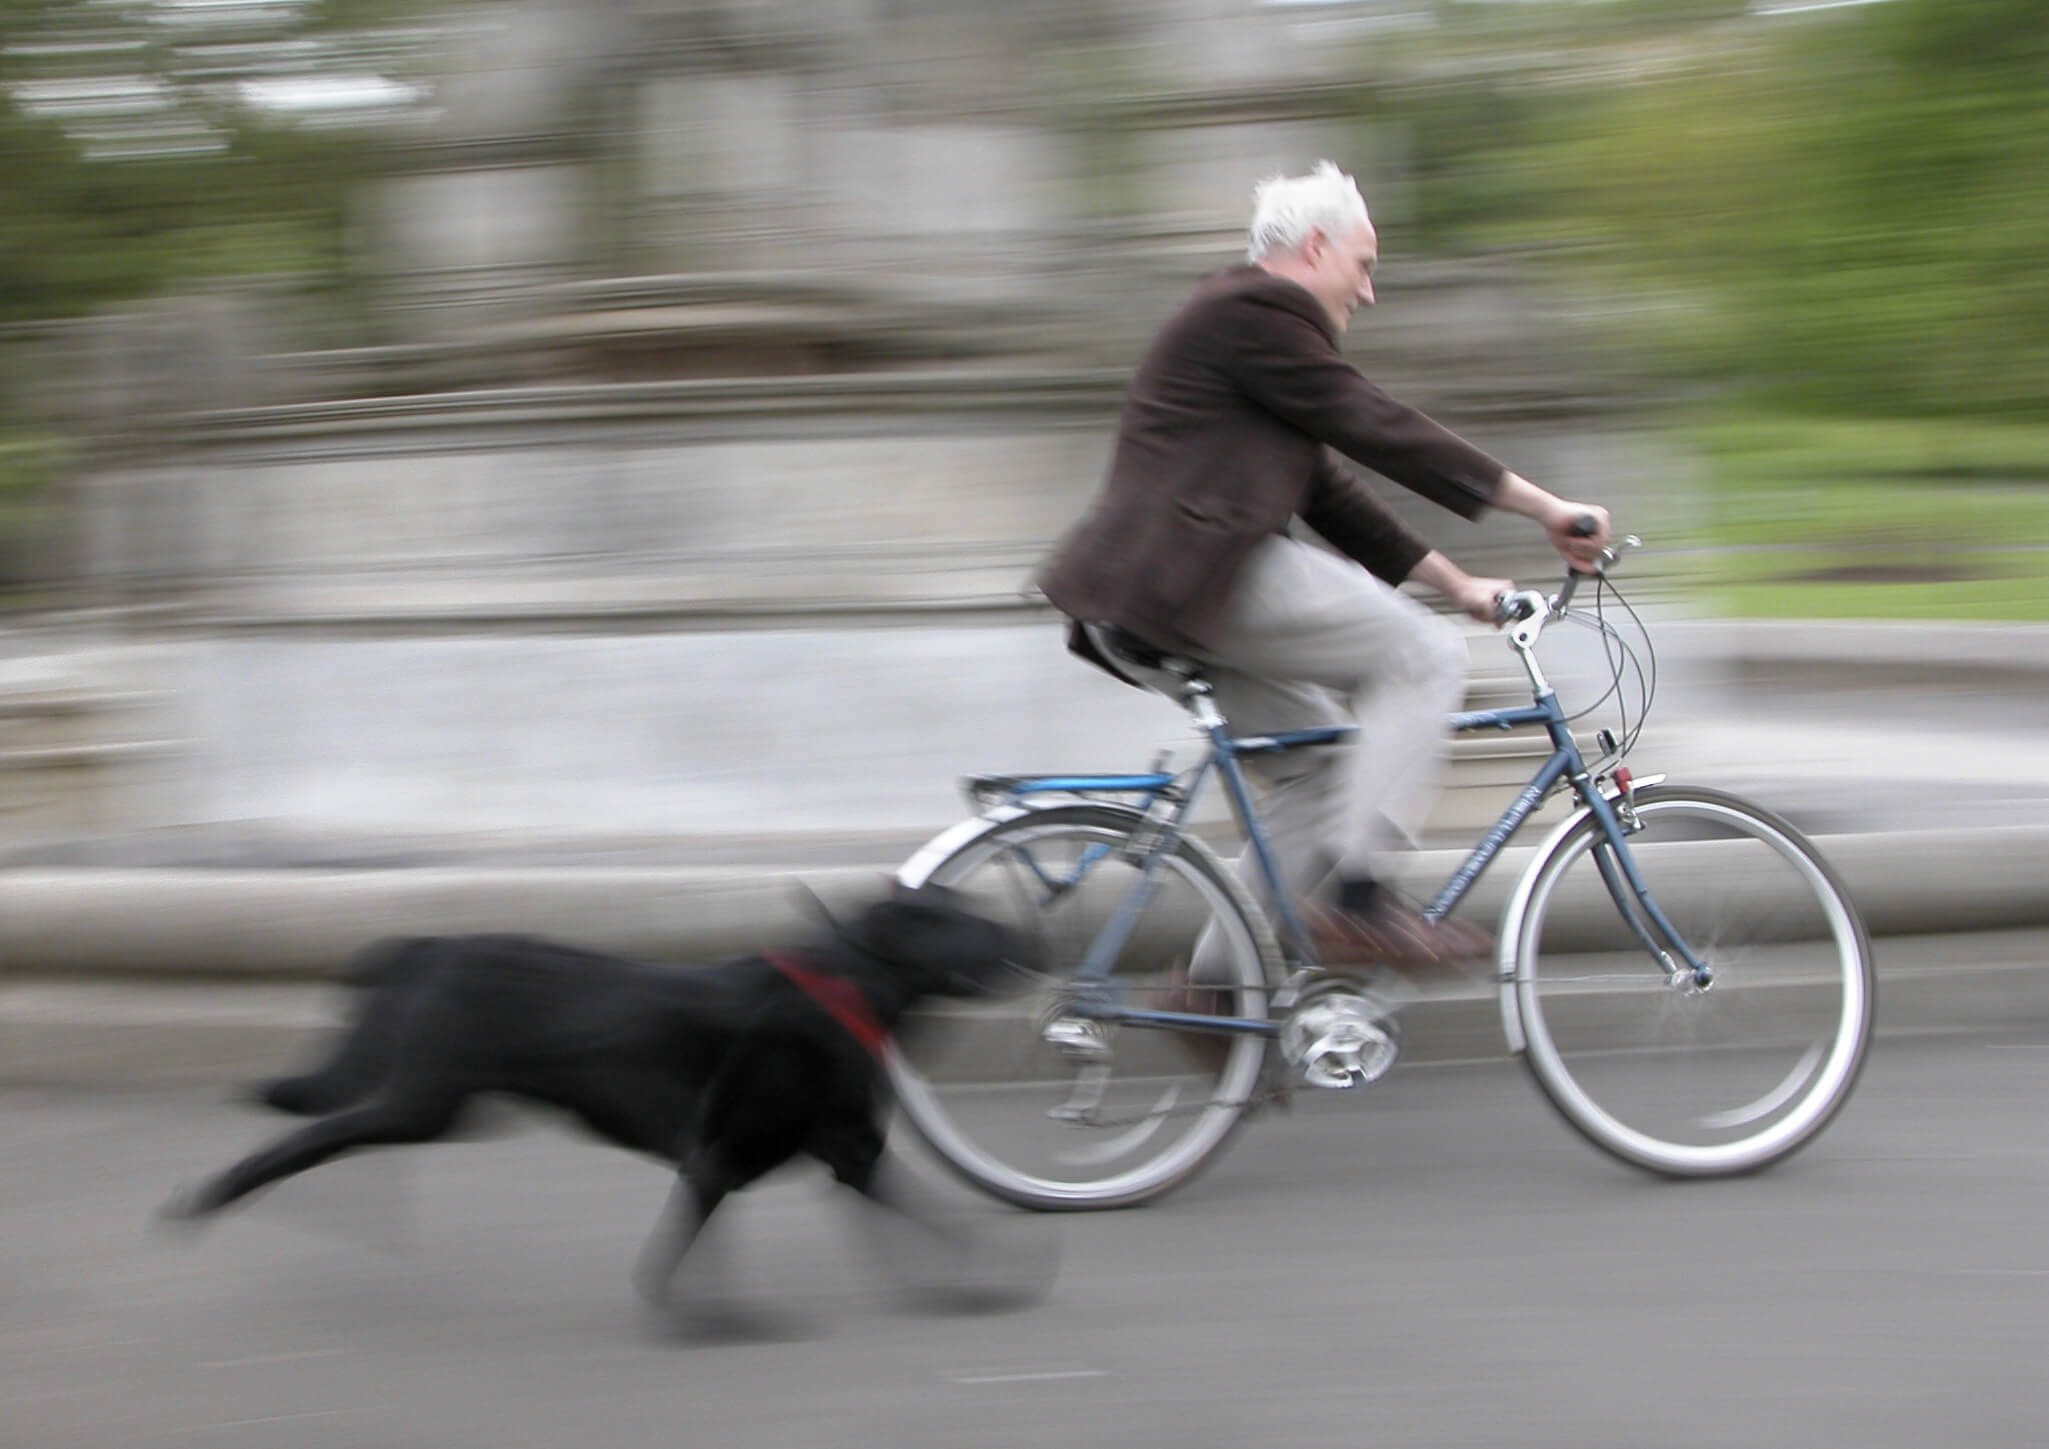 Dogs and bikes